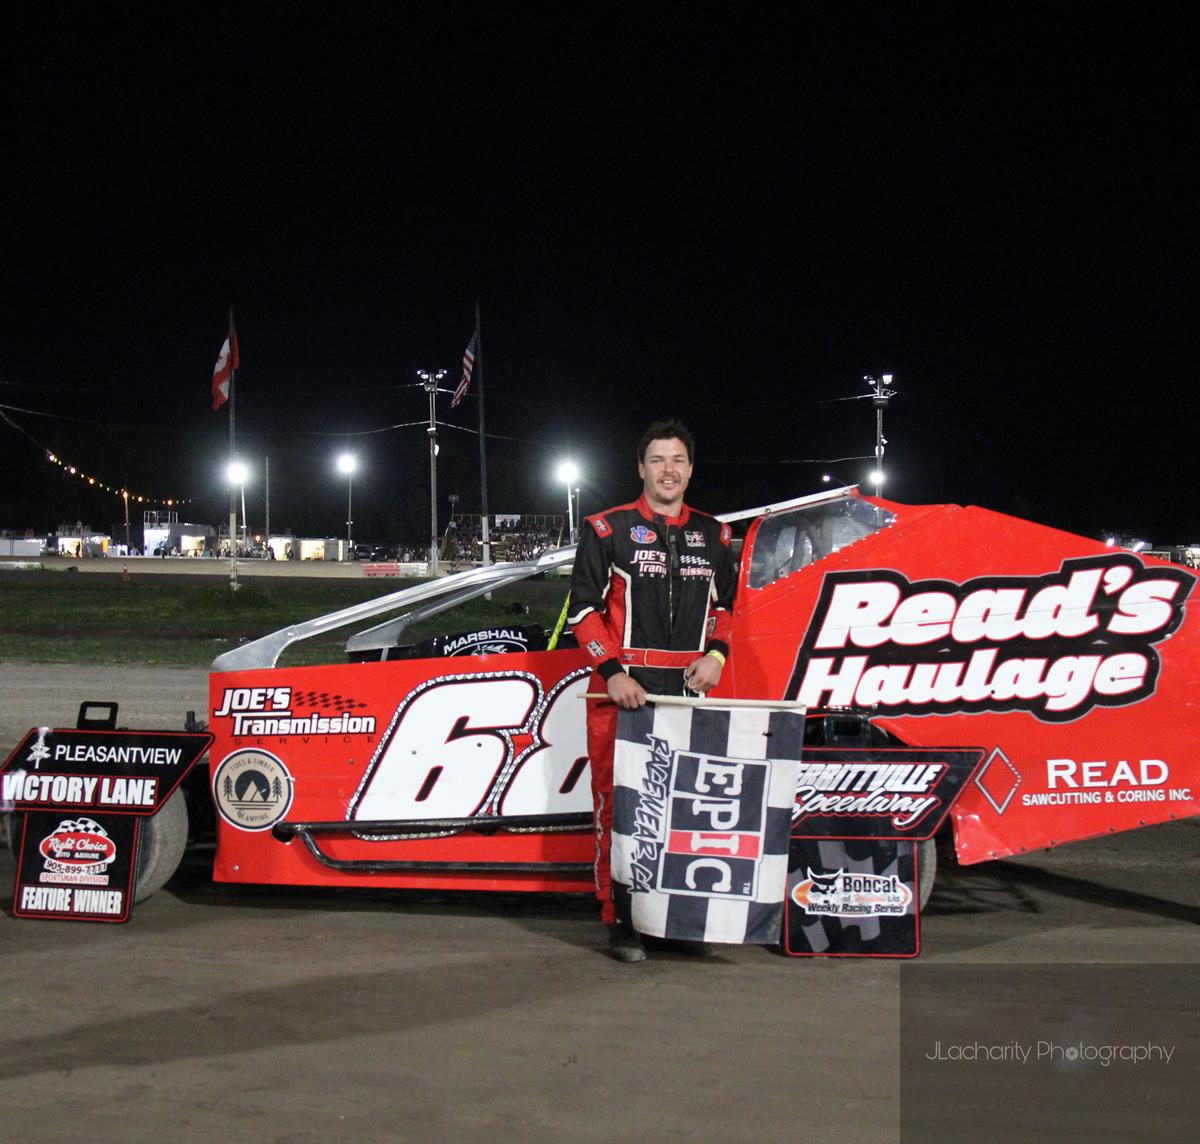 REDEMPTION AND A WIN FOR THE RENEGADE HIGHLIGHT SATURDAY NIGHT AT MERRITTVILLE SPEEDWAY